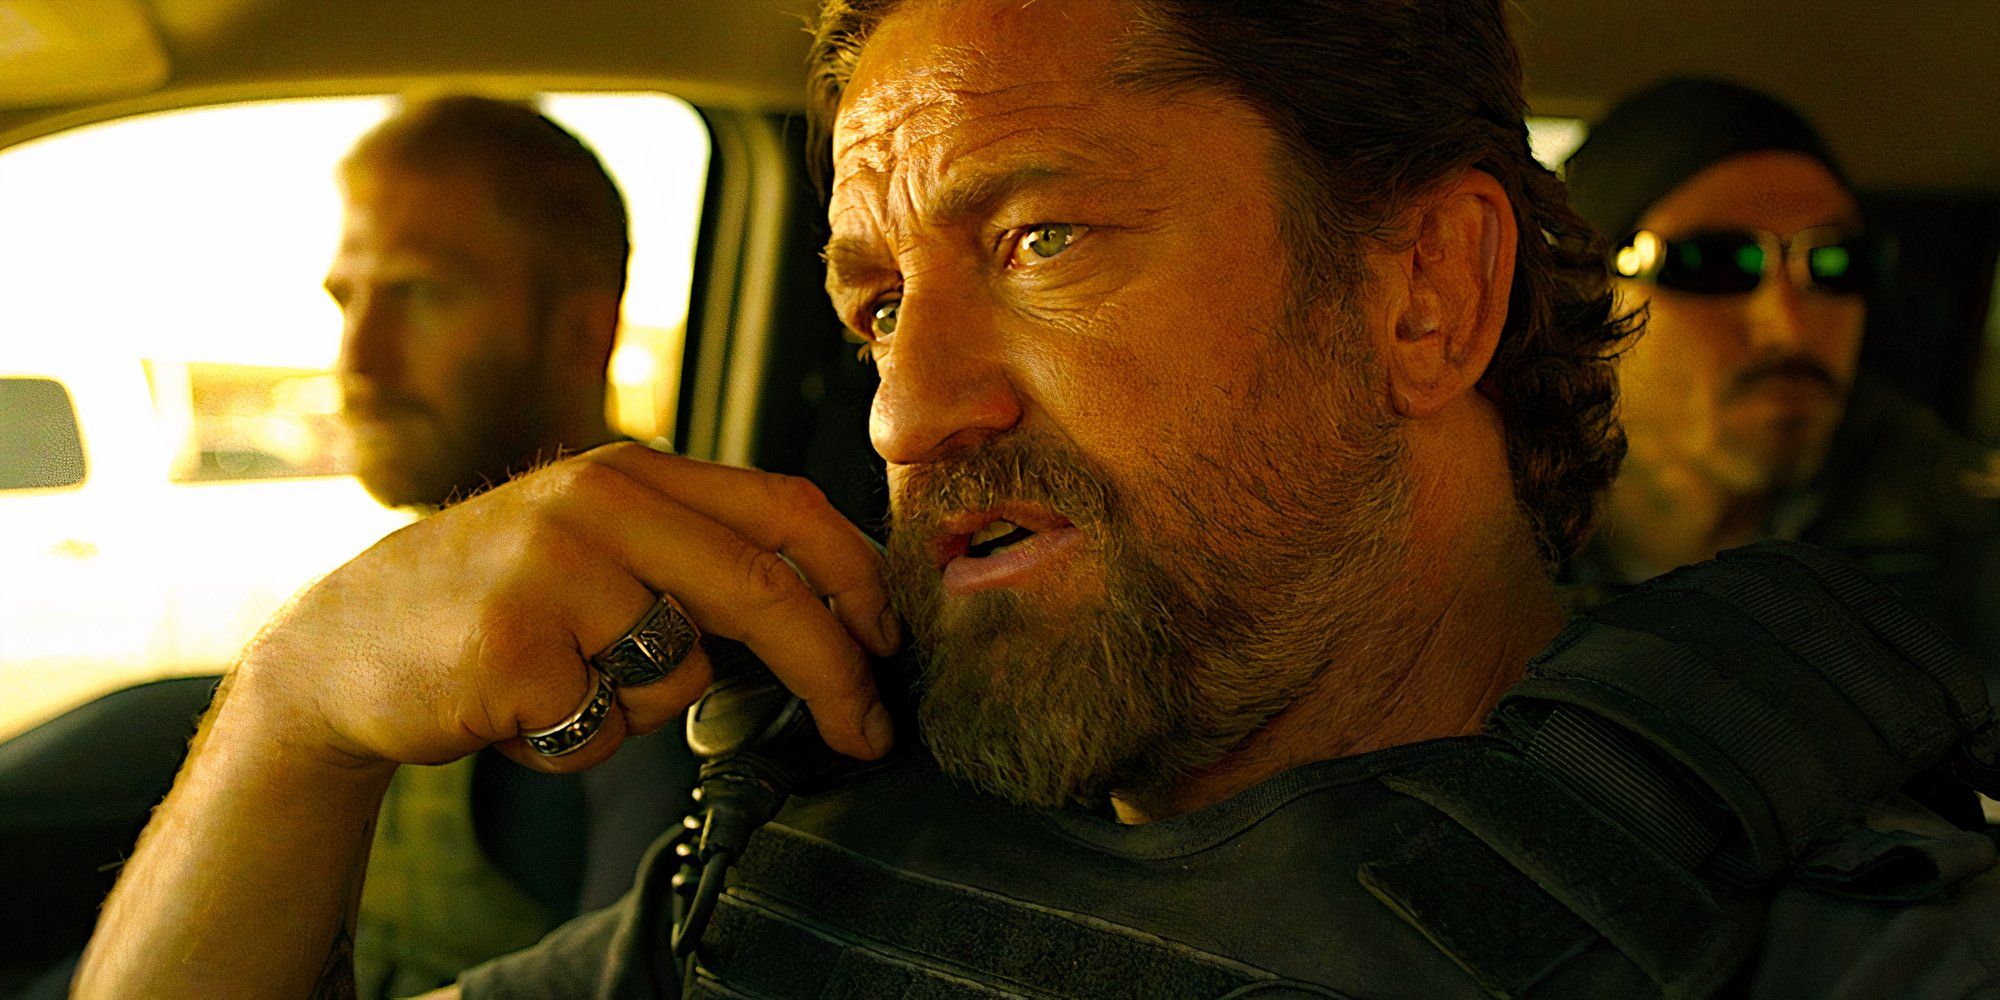 Gerard Butler talks on a radio while riding in a car in a scene from Den of Thieves